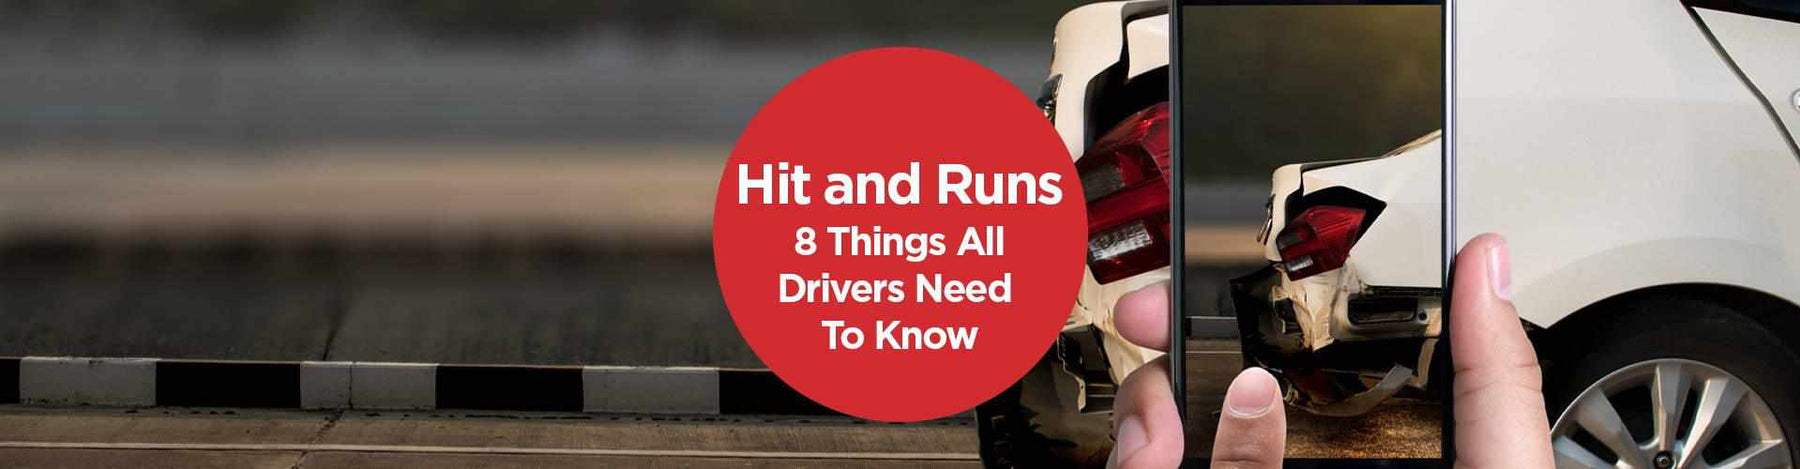 Hit and Runs - 8 Things All Drivers Need To Know -  - BlackboxMyCar Canada